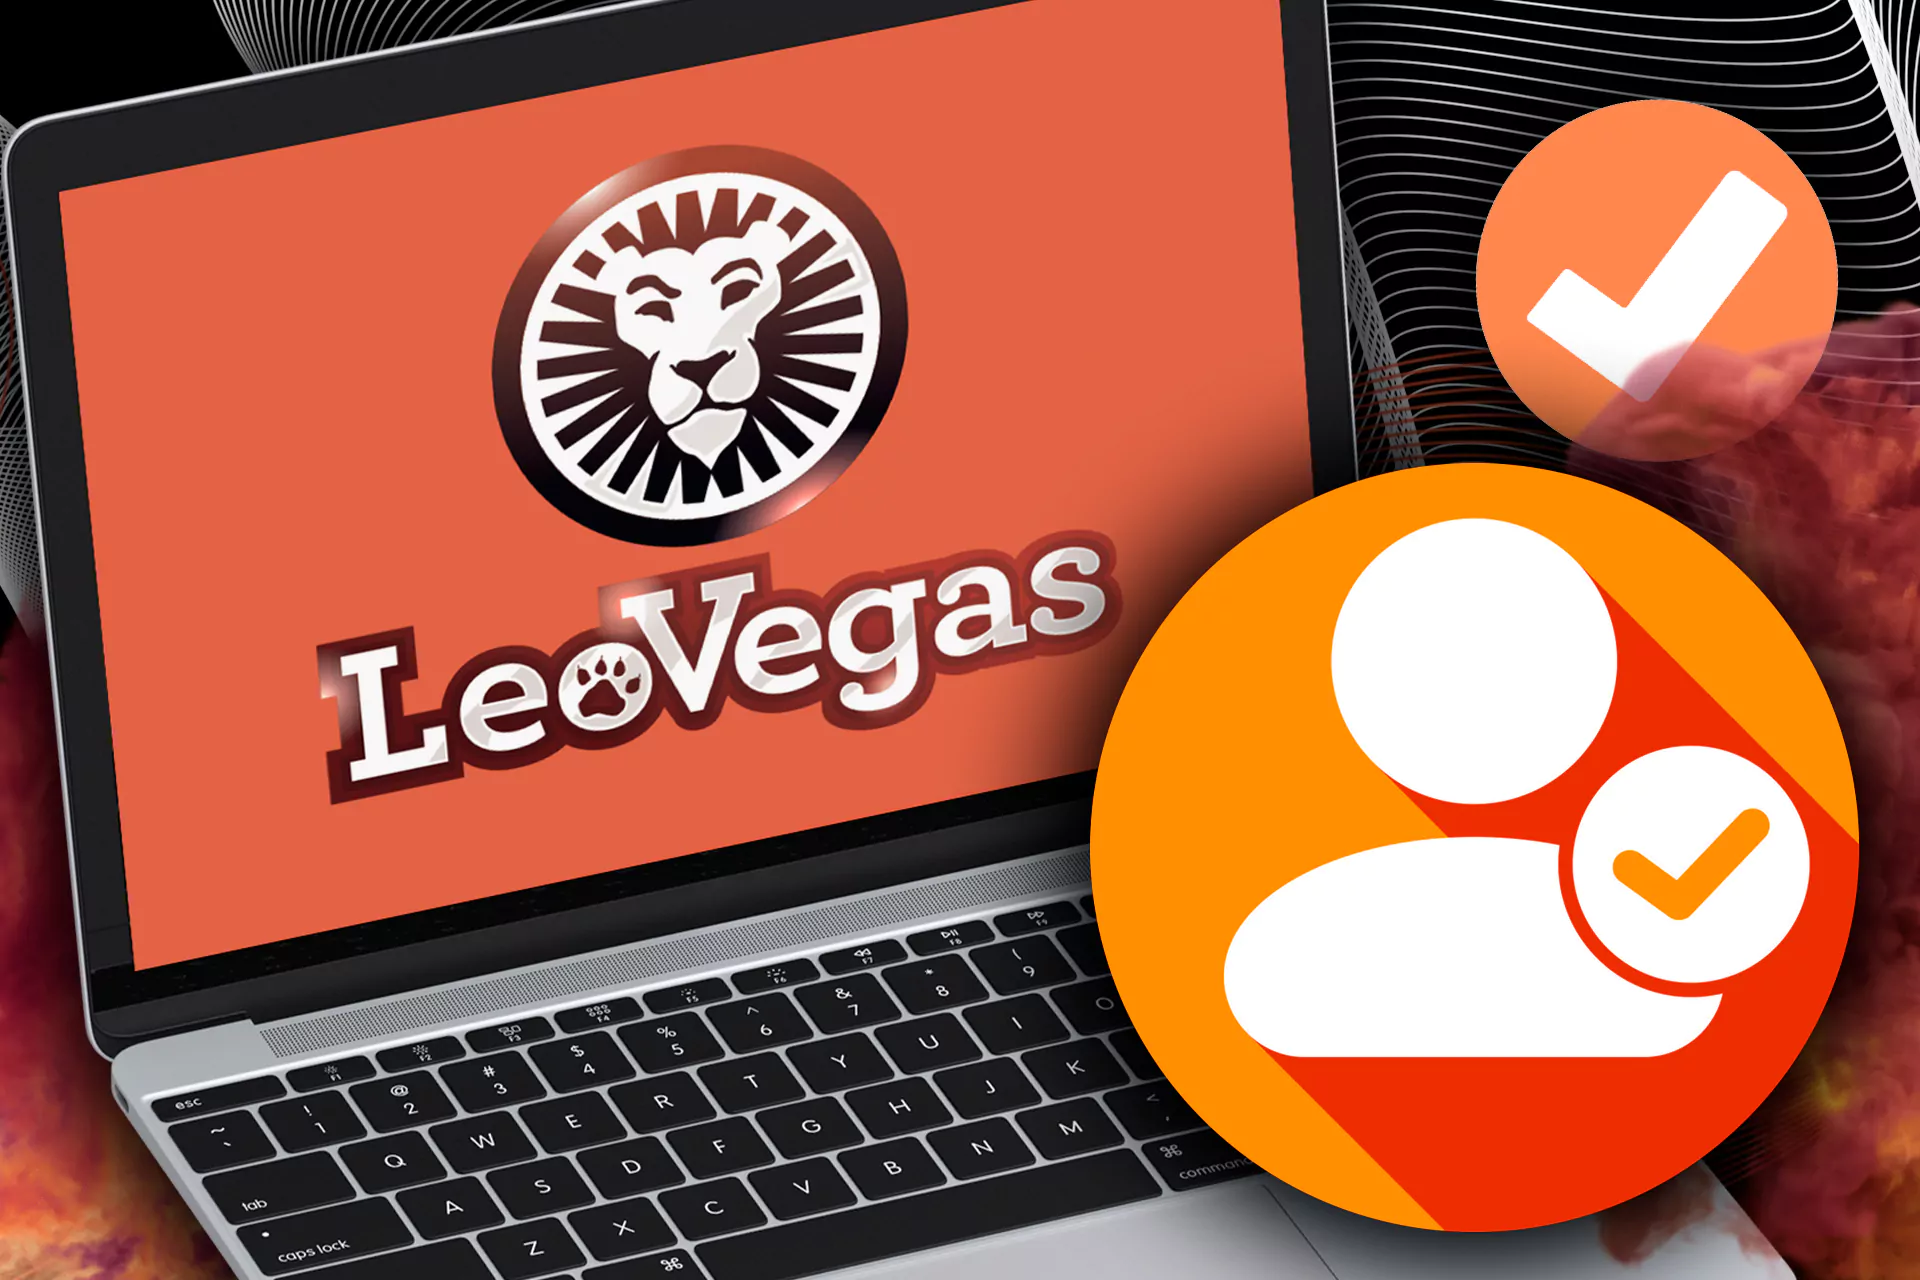 You have to verify your account to withdraw the winnings from LeoVegas.